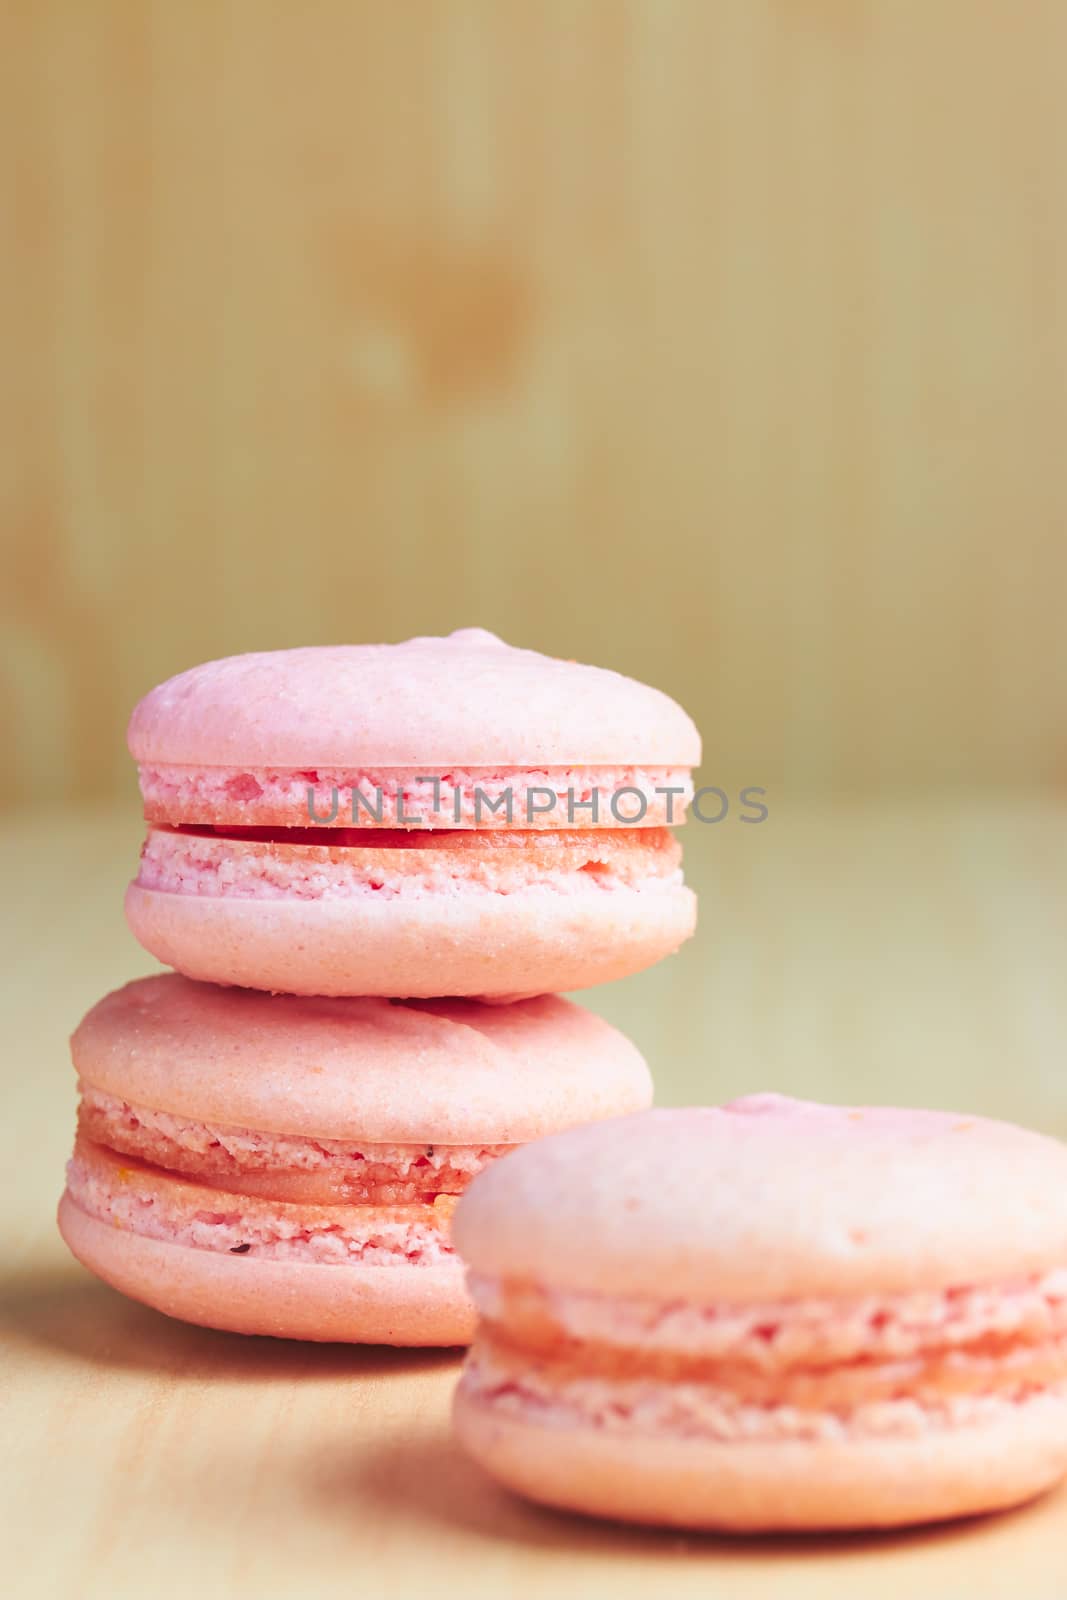 Sweet french macaroons on wooden background